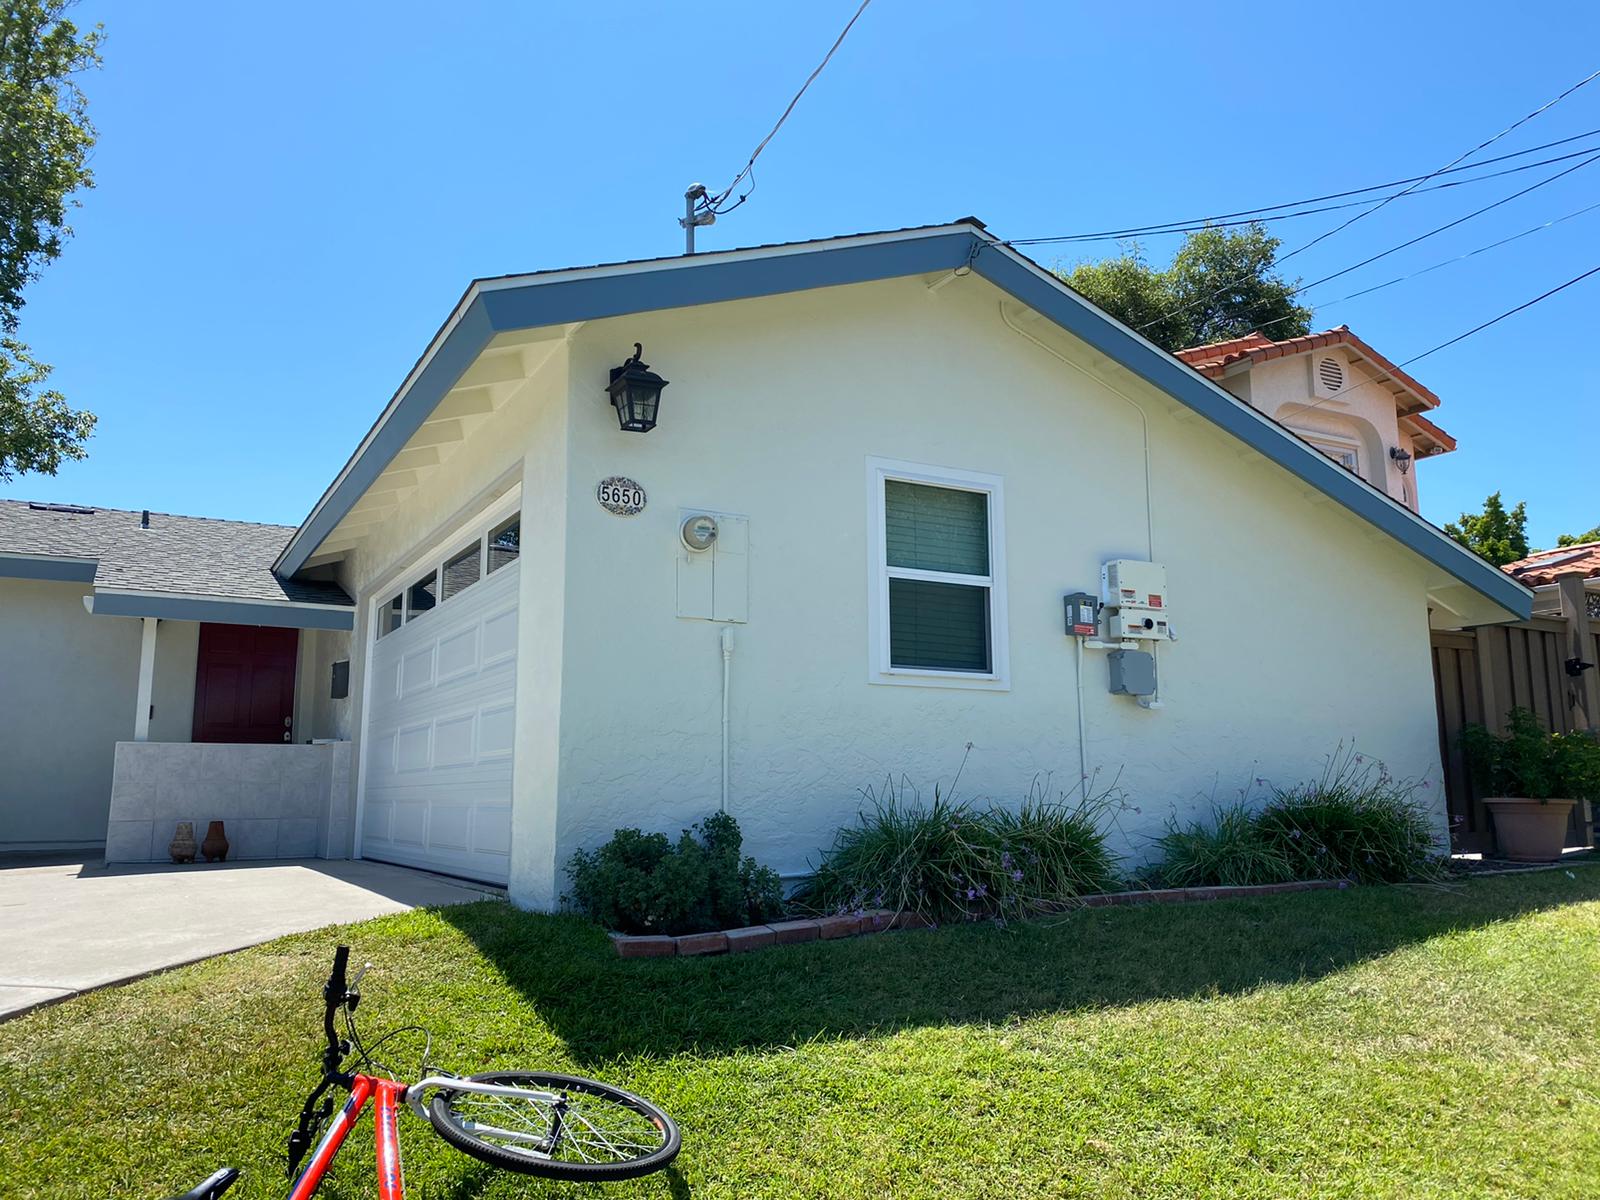 House Painting in La Mesa 91942